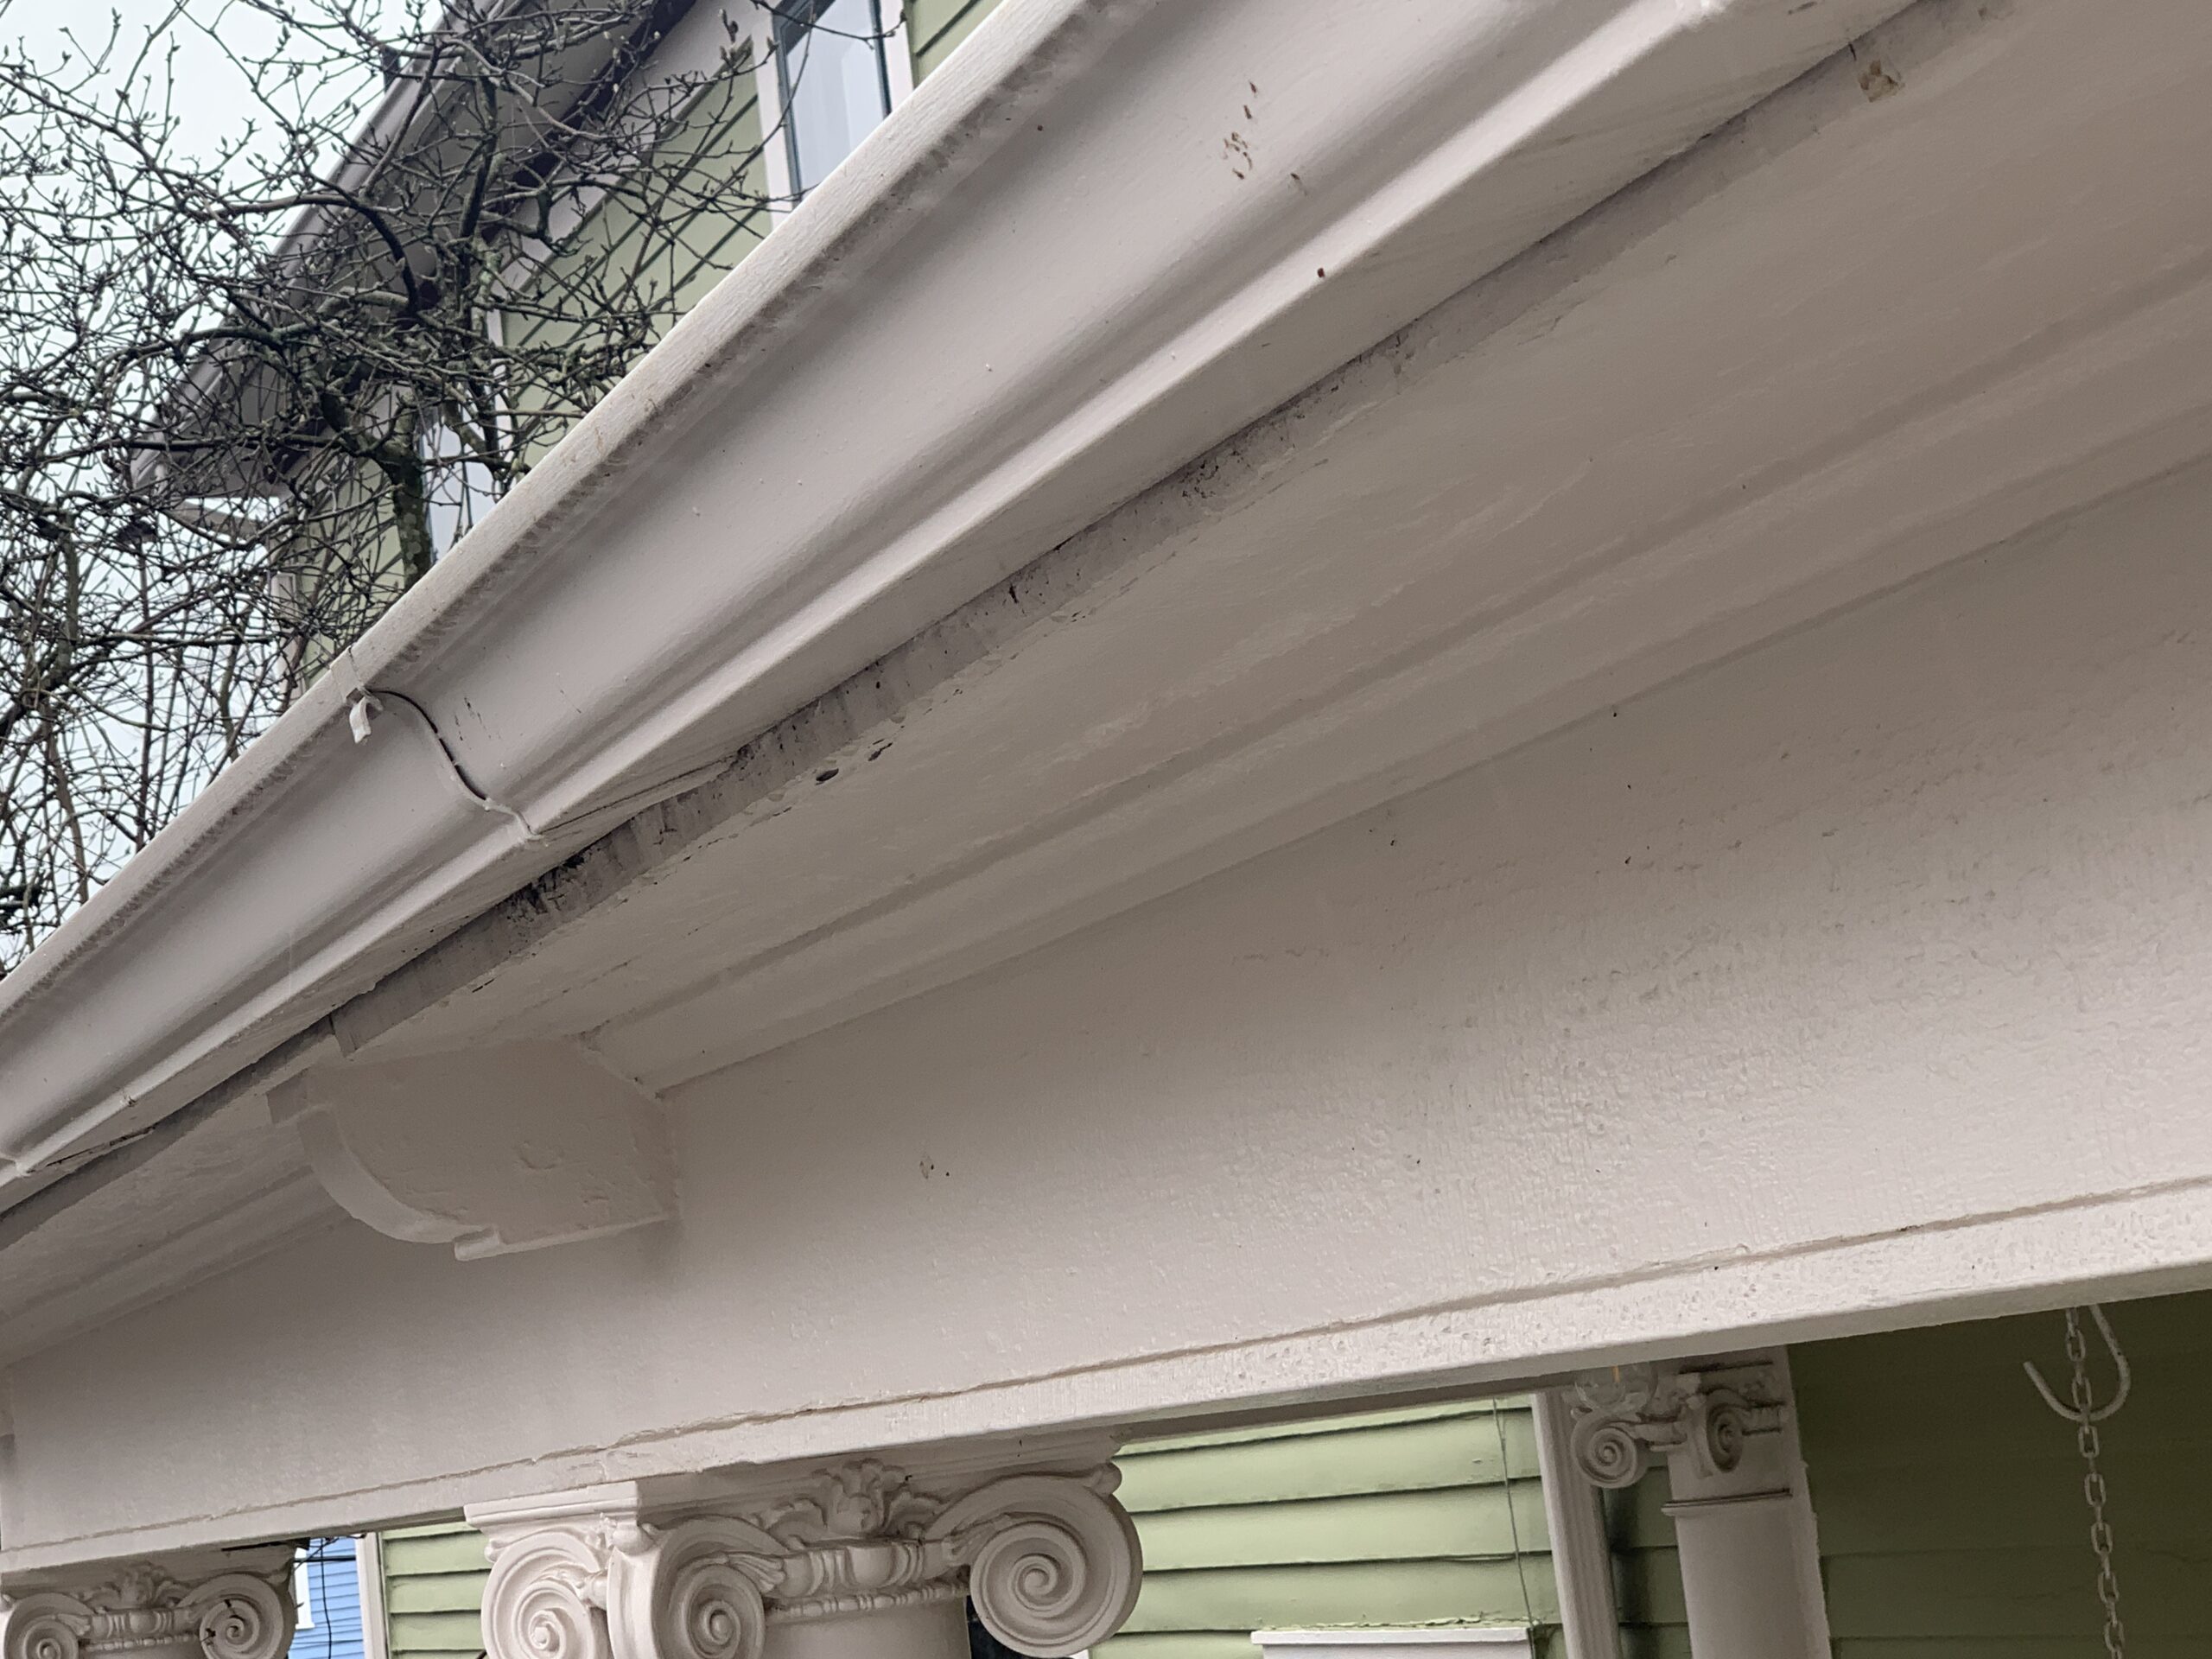 The facia board is being damaged by water caused from leaky and non-functional gutters and downspouts